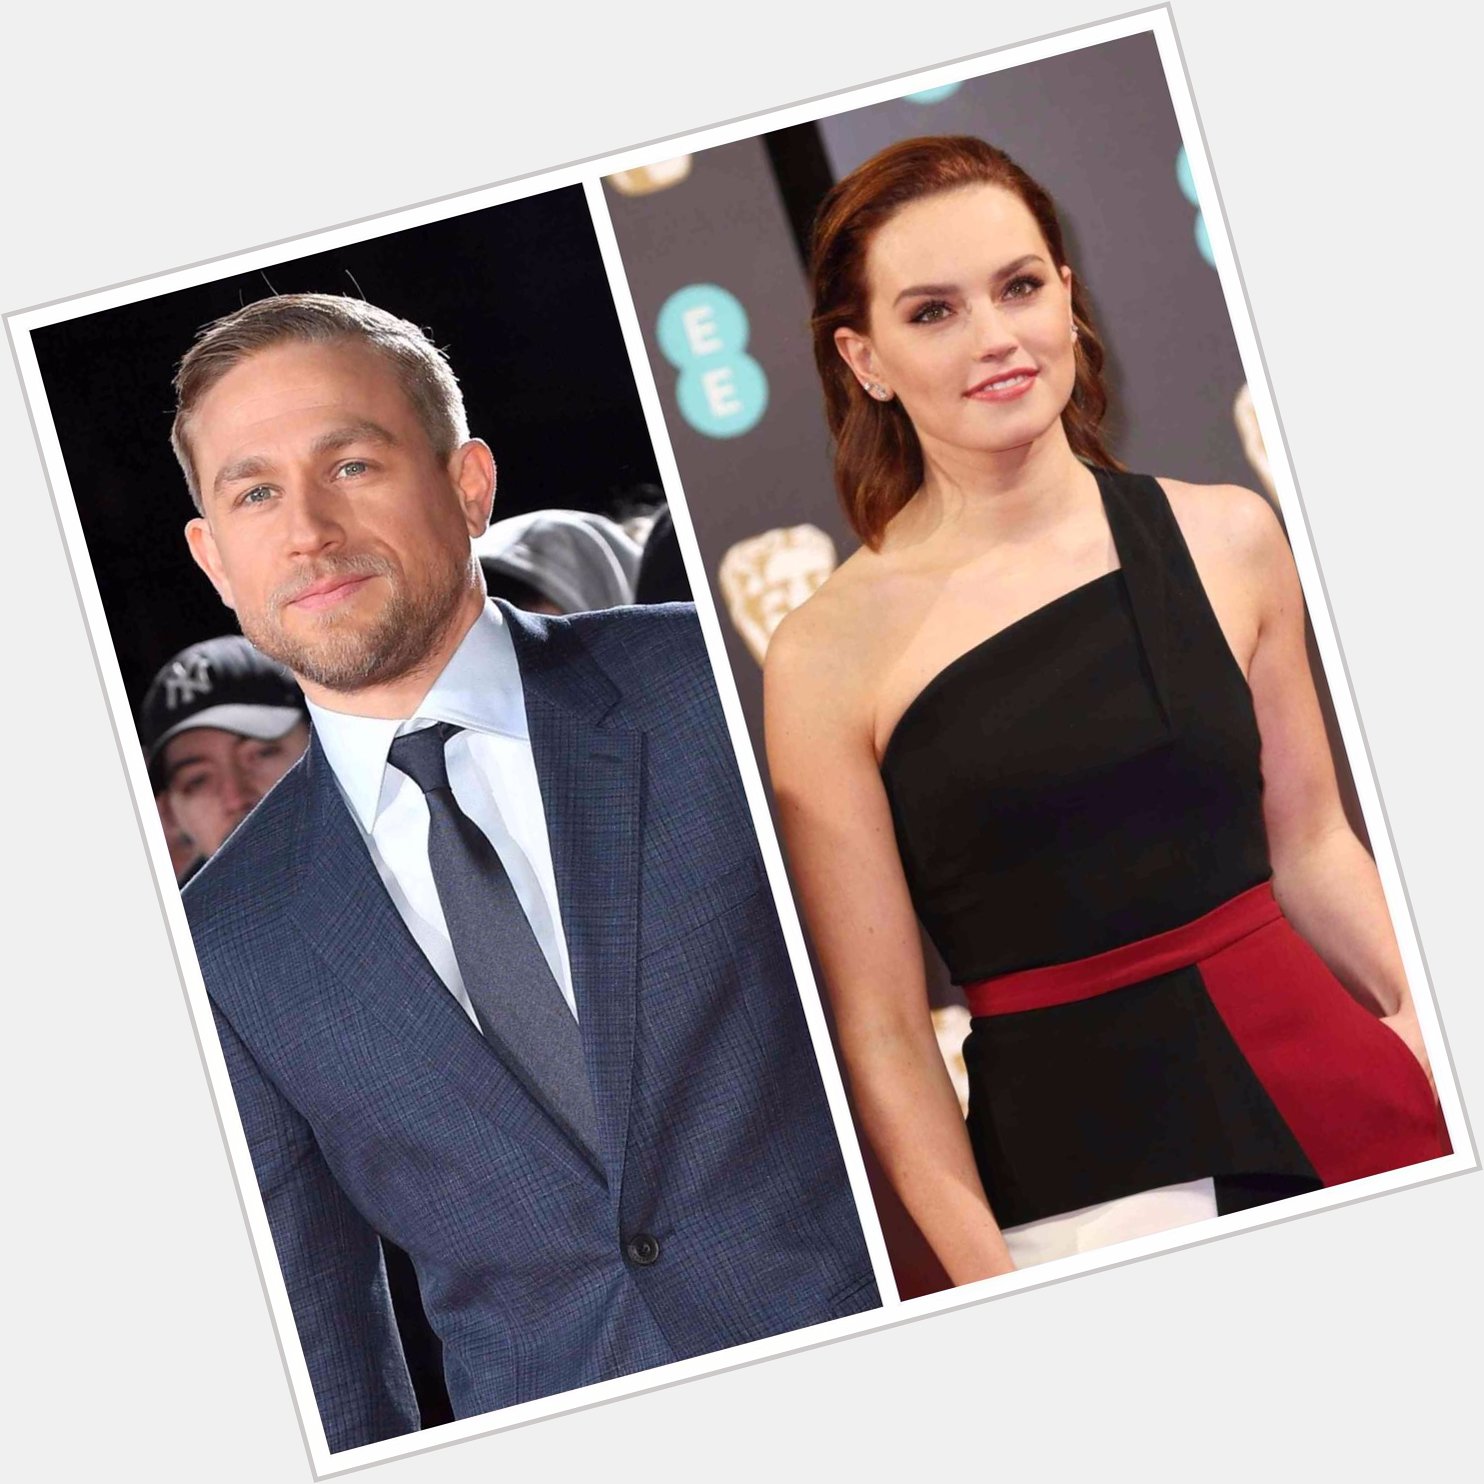 Happy birthday to the stars of \Pacific Rim\ and \Star Wars\- Charlie Hunnam and Daisy Ridley! 